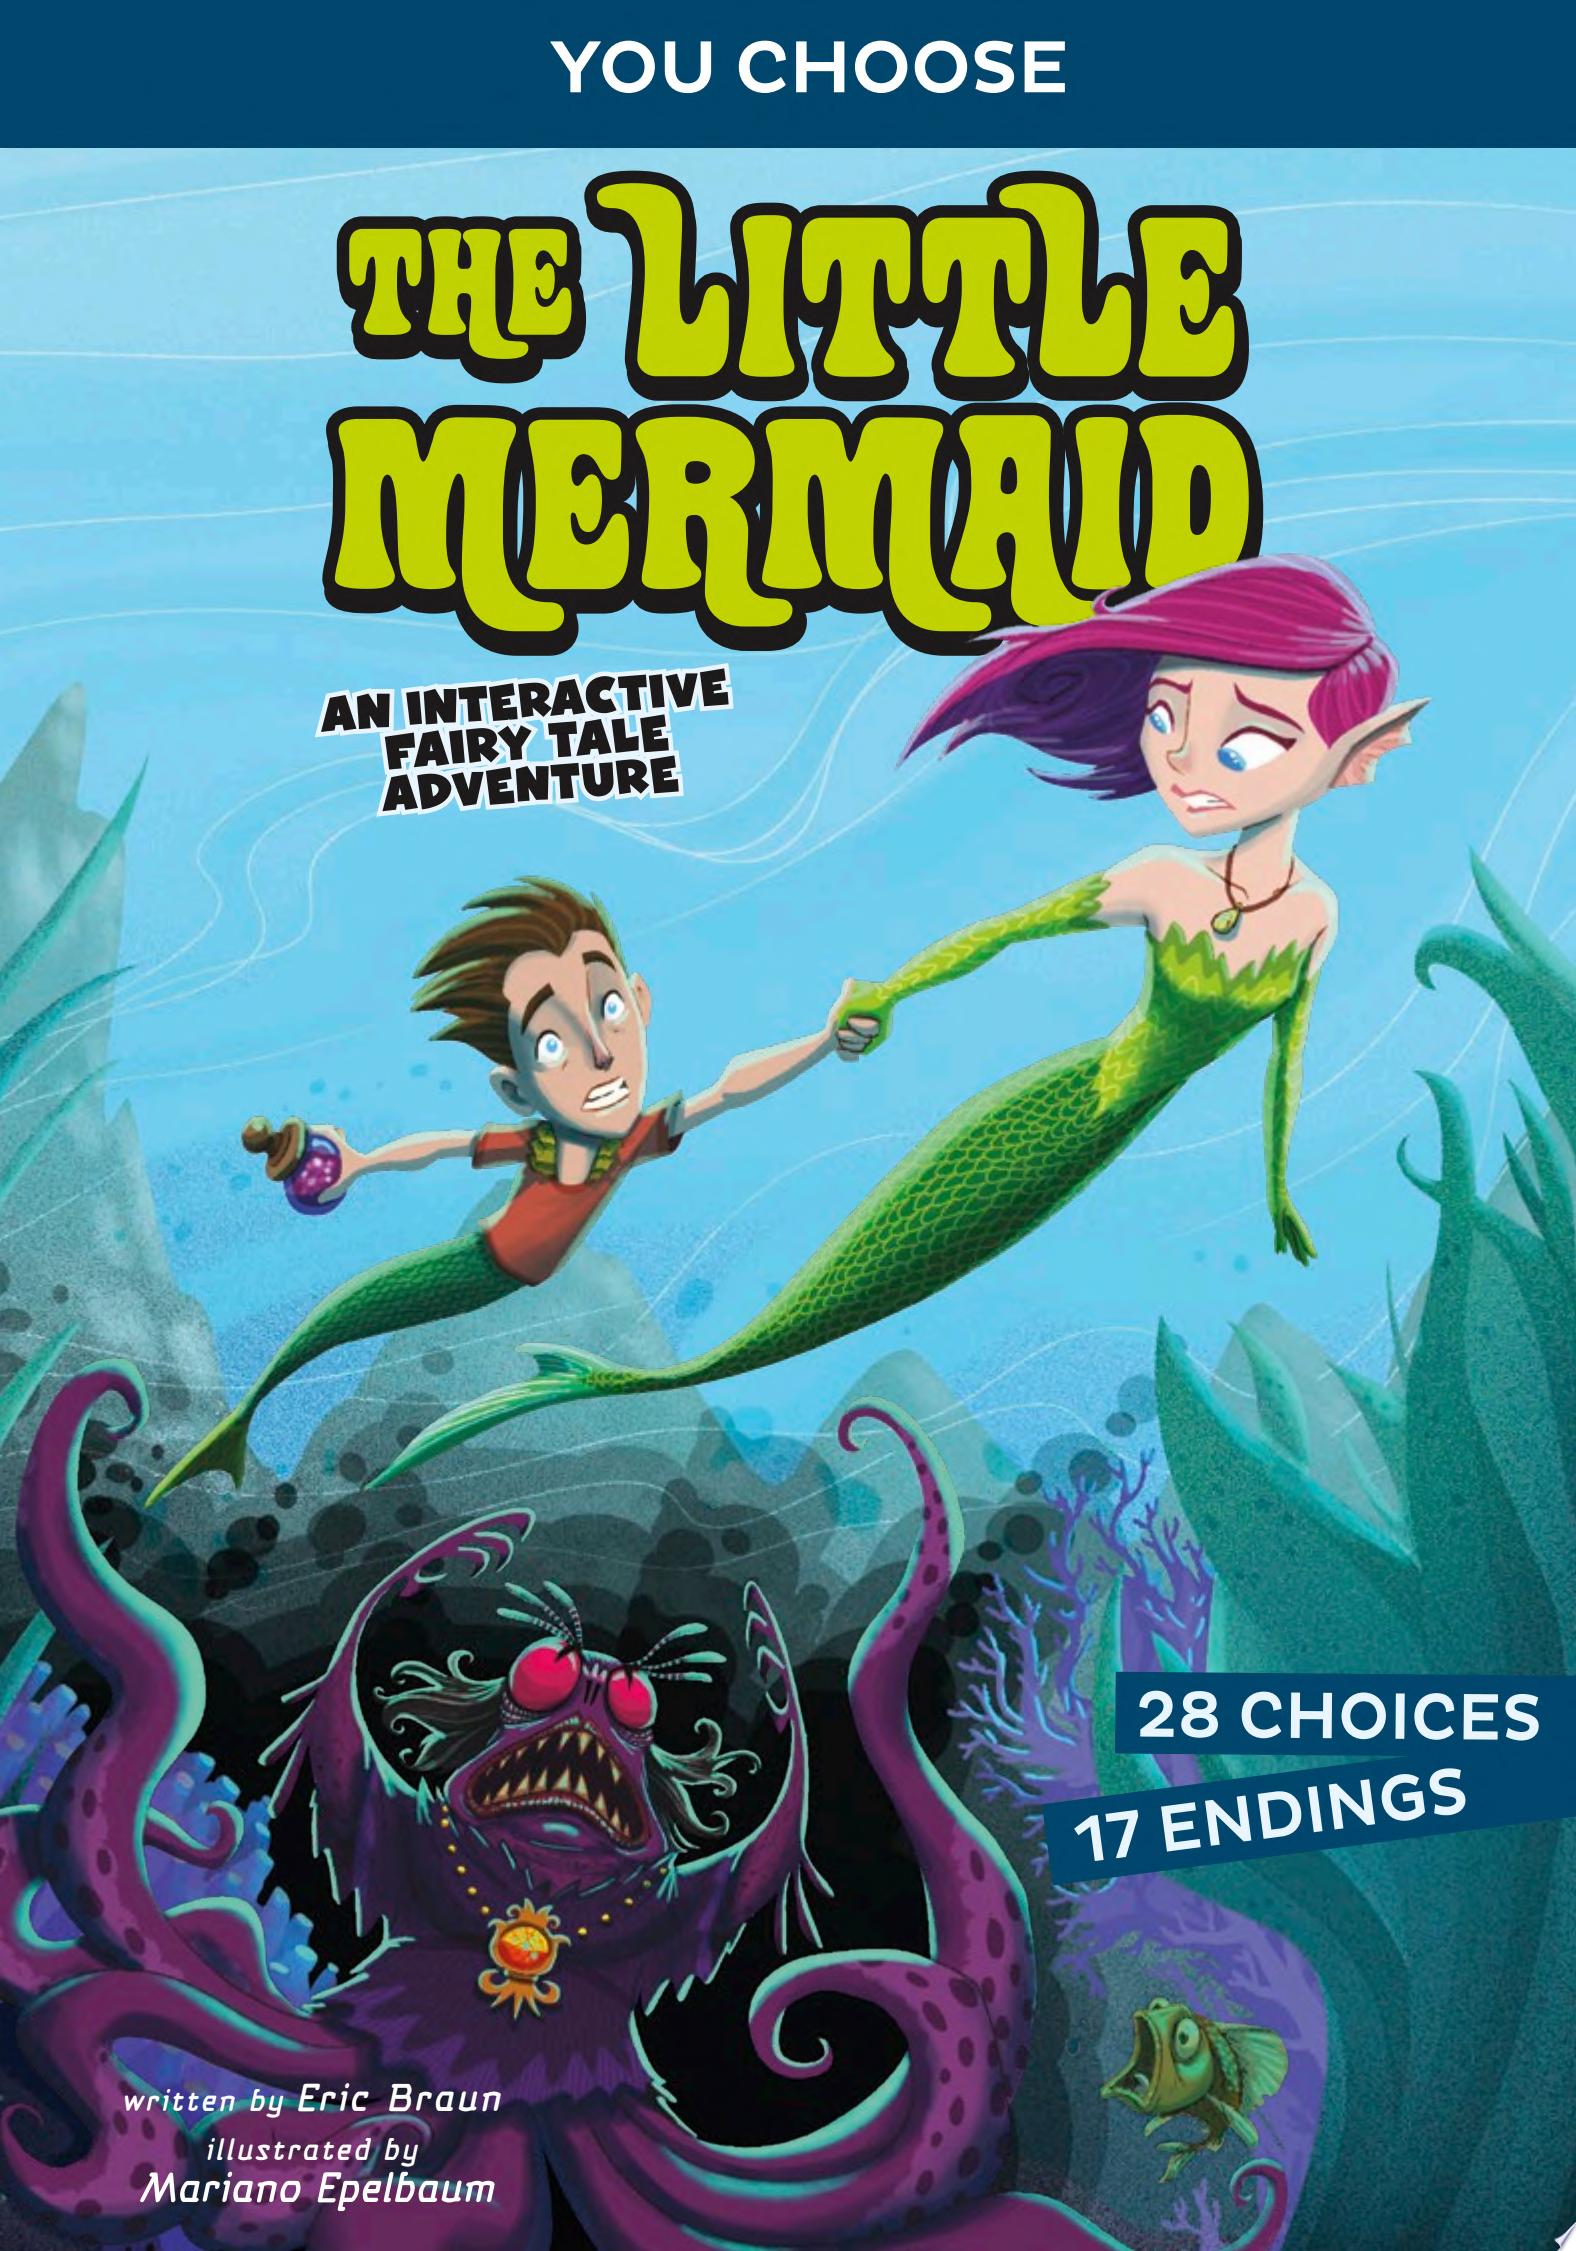 Image for "The Little Mermaid"